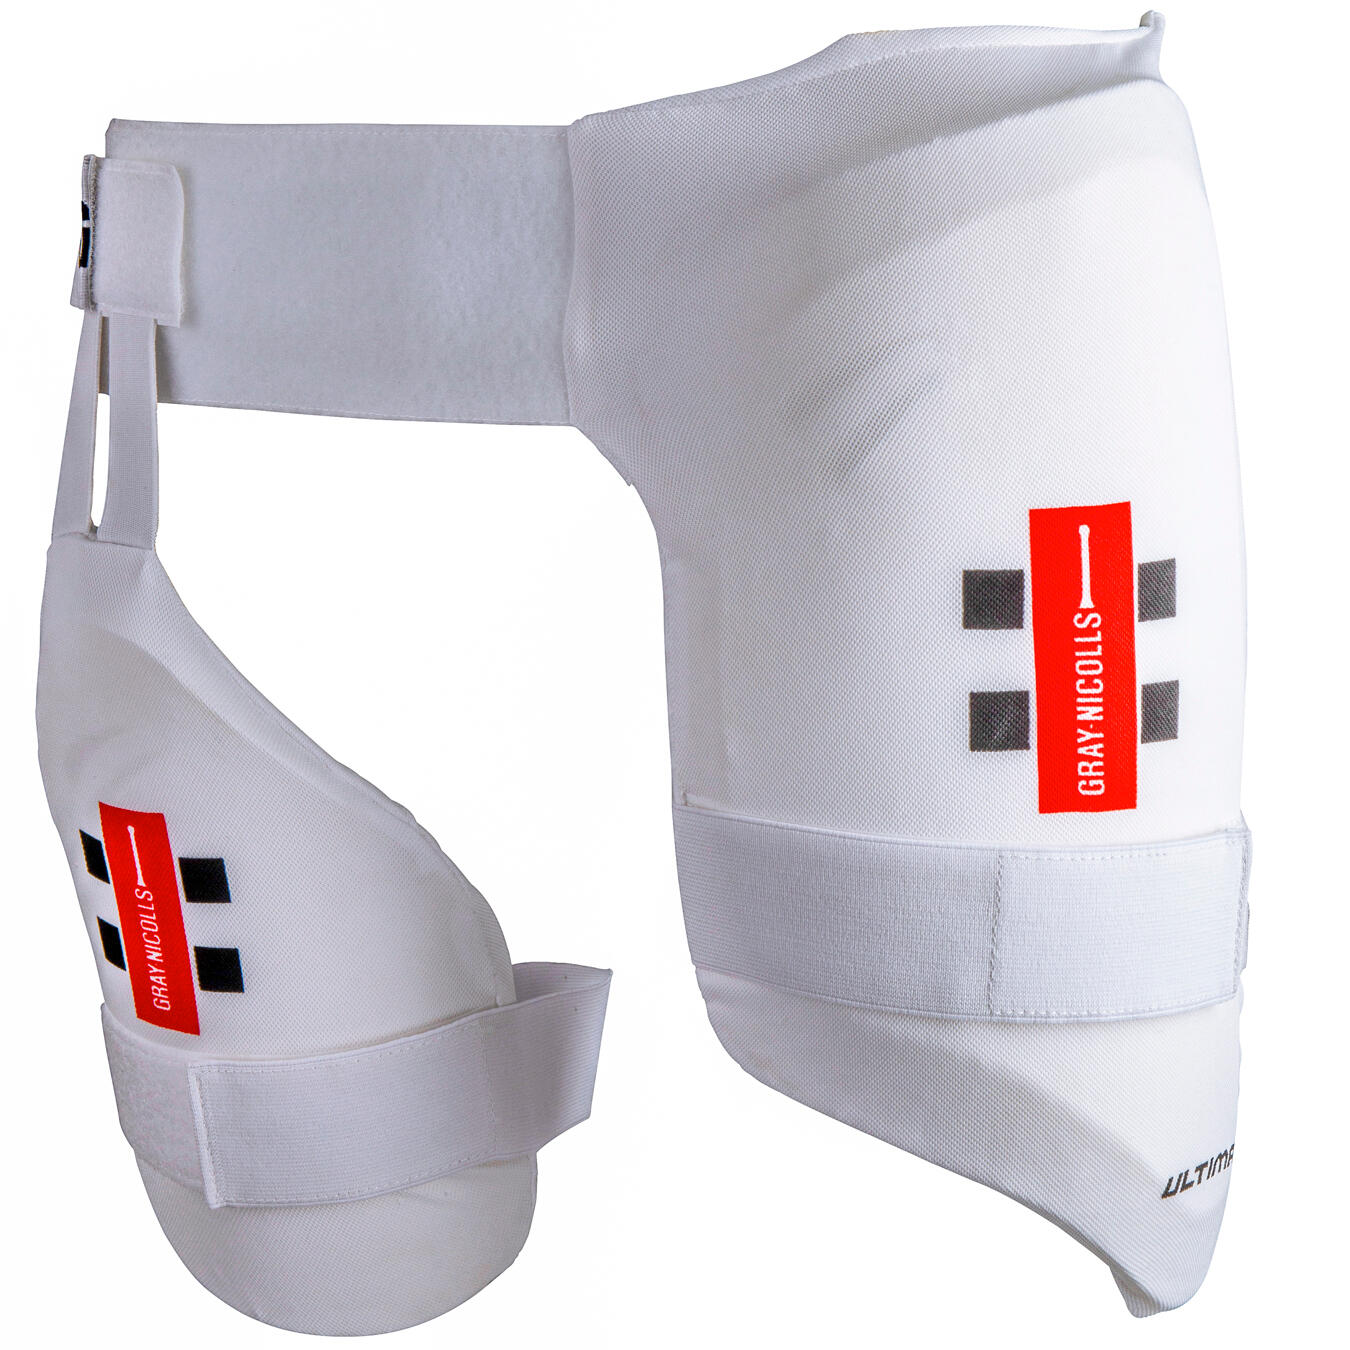 All In One Academy Thigh Pads, White, LH 1/1